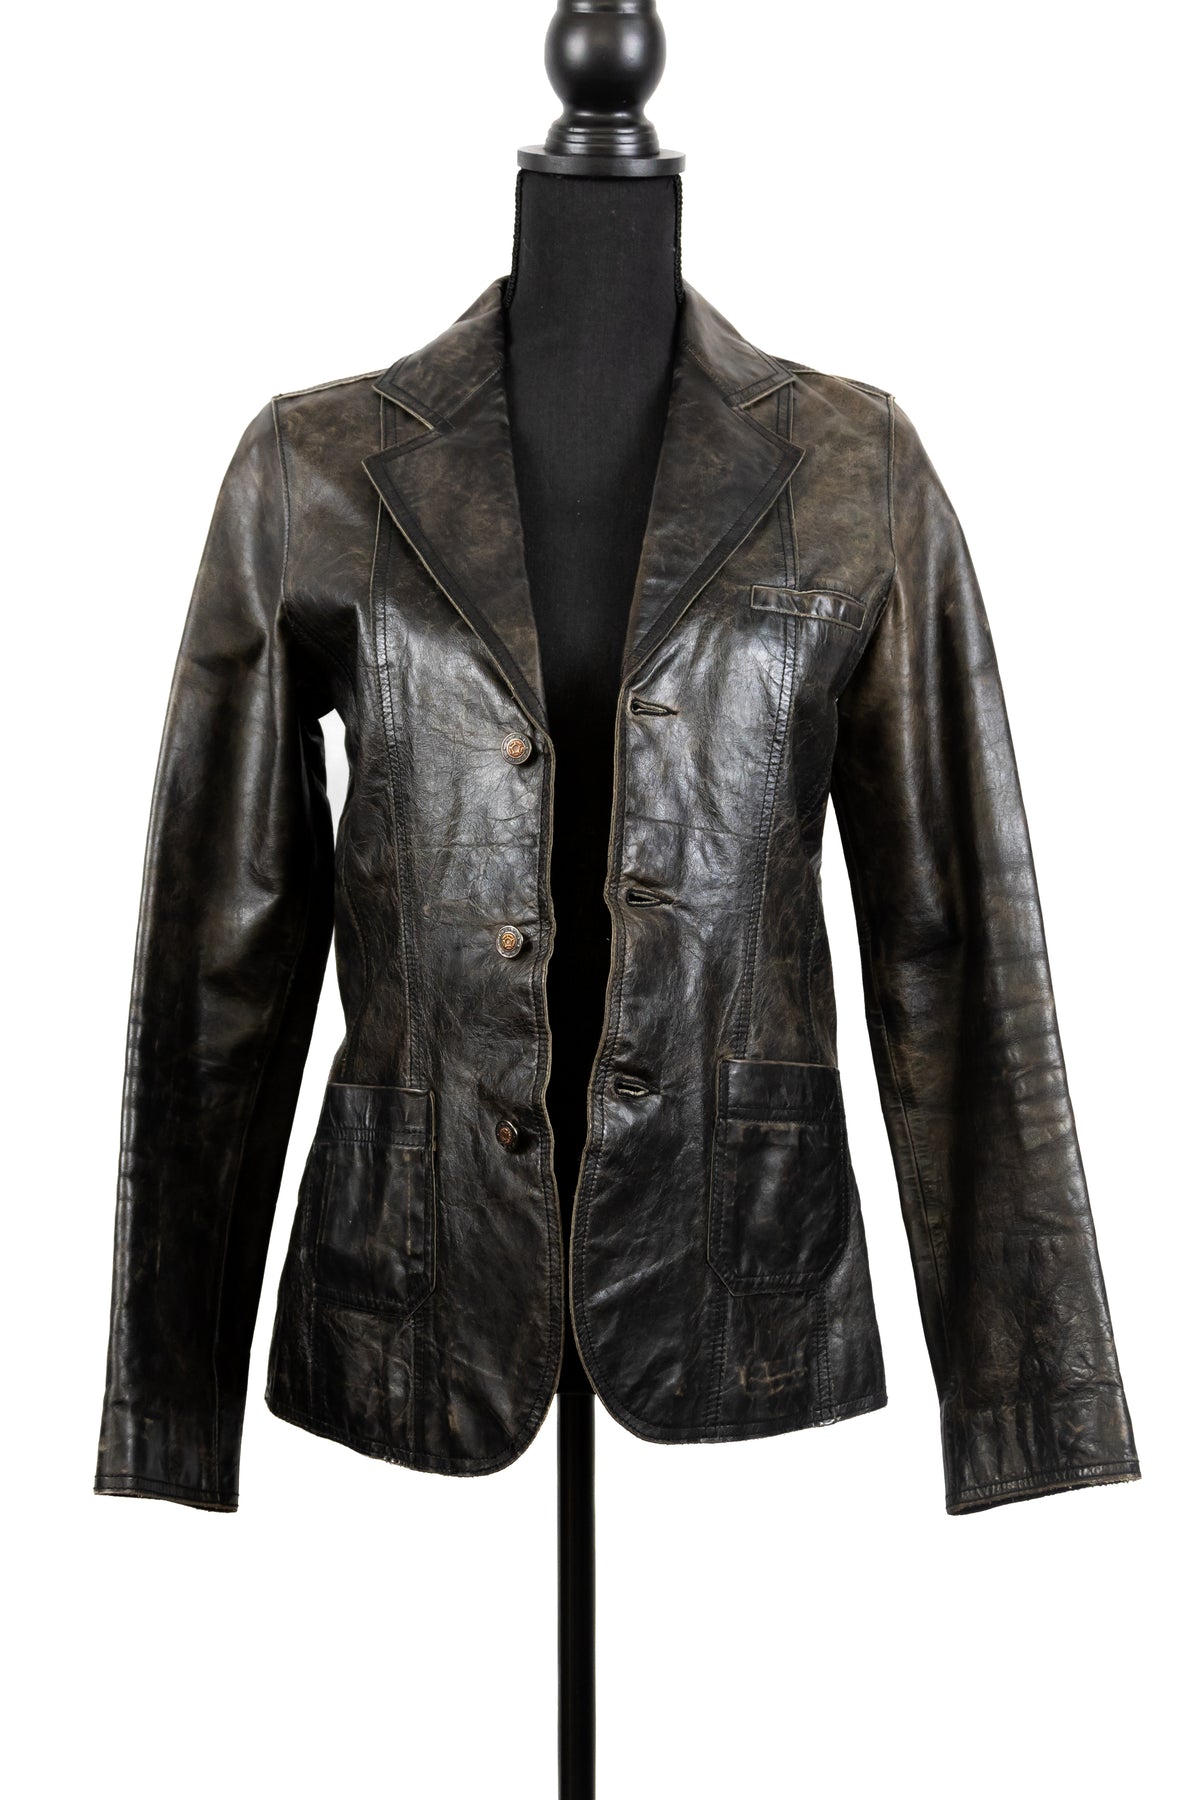 EXTREMELY RARE Vintage Leather Jacket As Seen on Lorelia - Size S